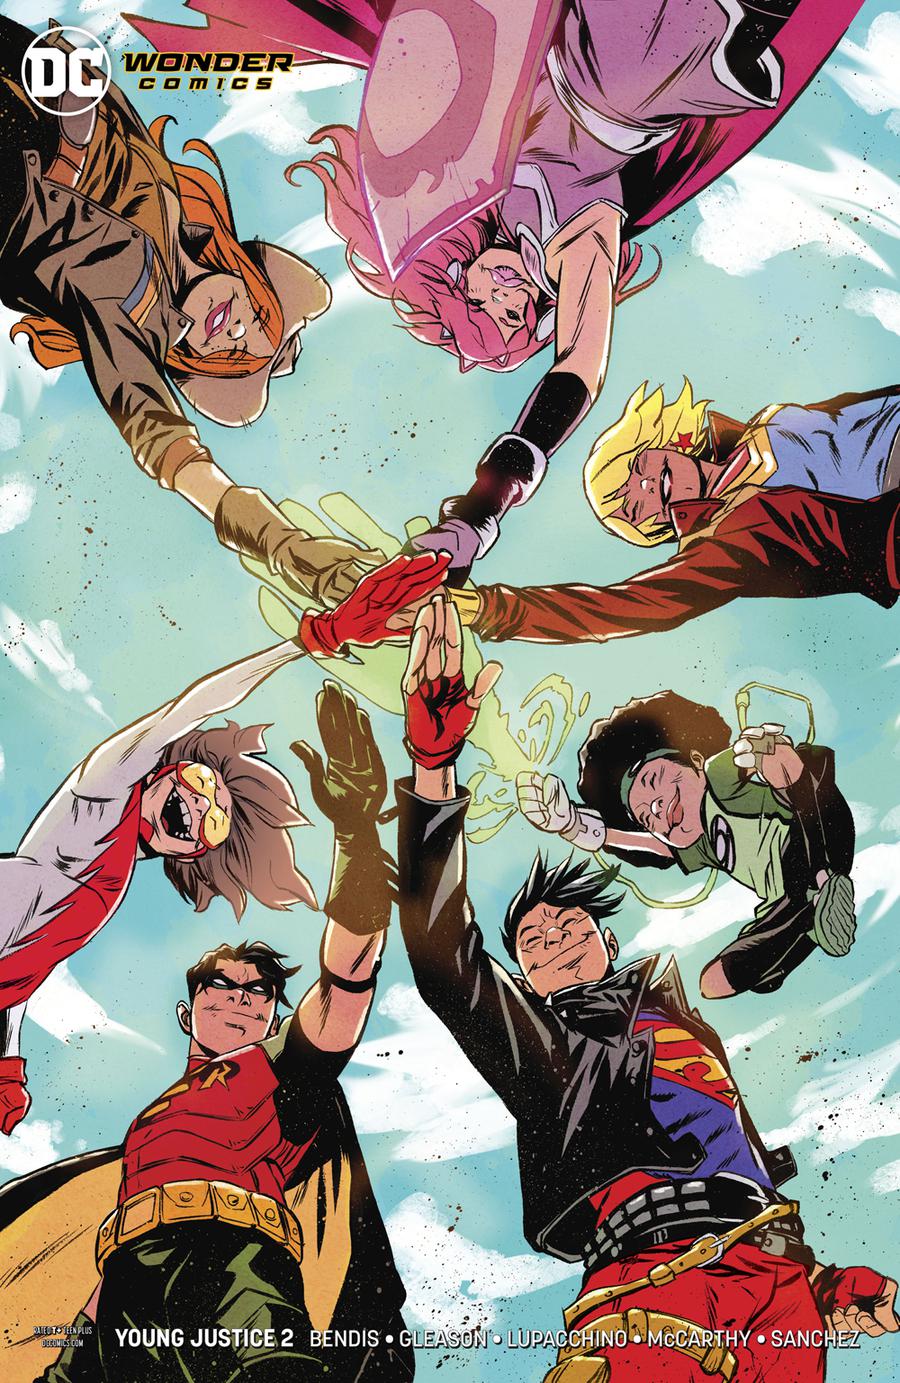 Young Justice Vol 3 #2 Cover B Variant Sanford Greene Cover